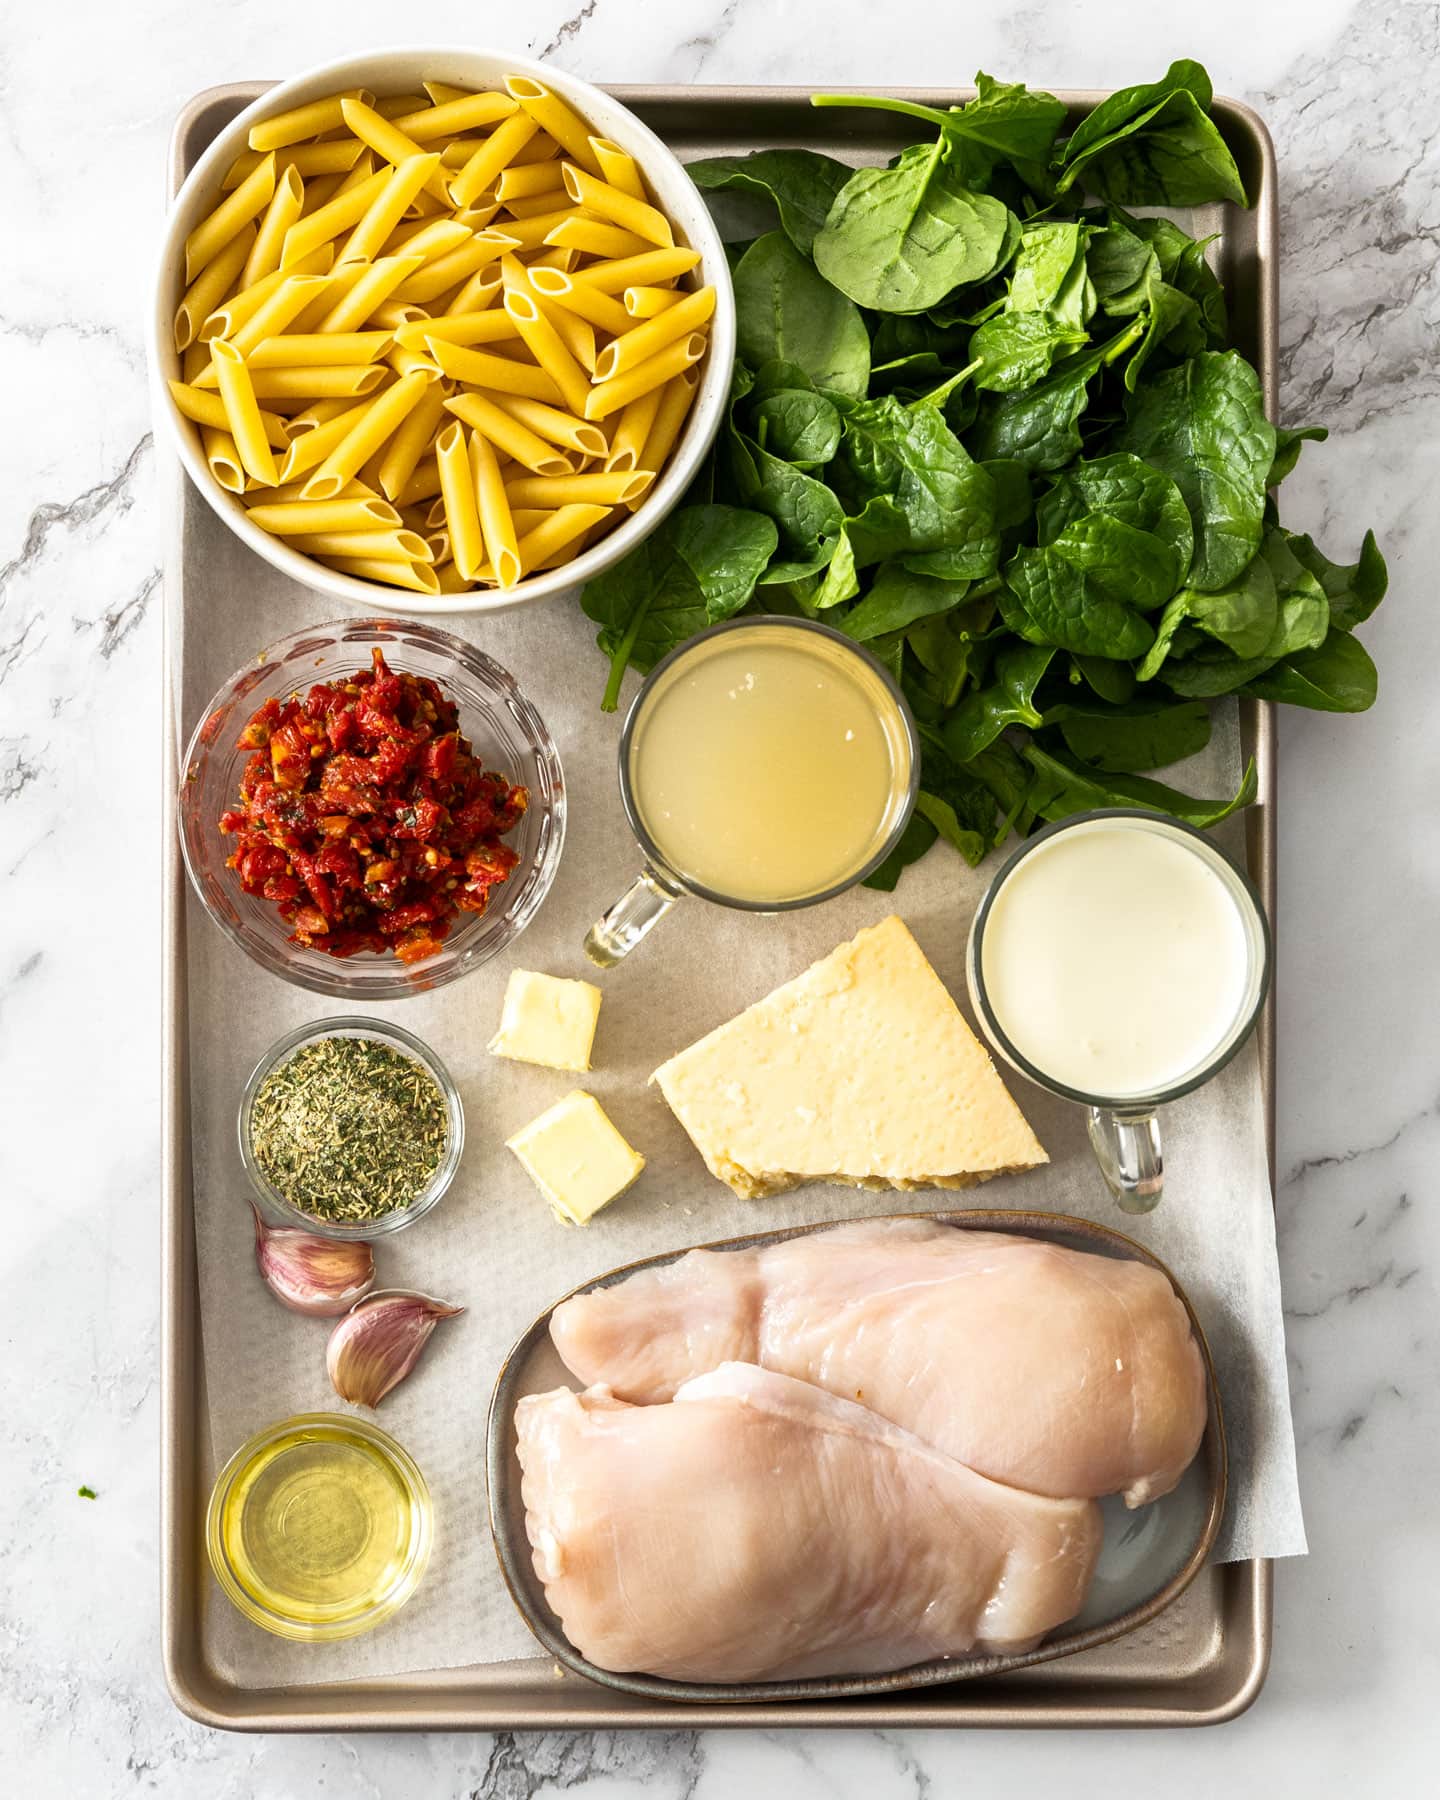 Ingredients for chicken penne pasta on a baking tray.